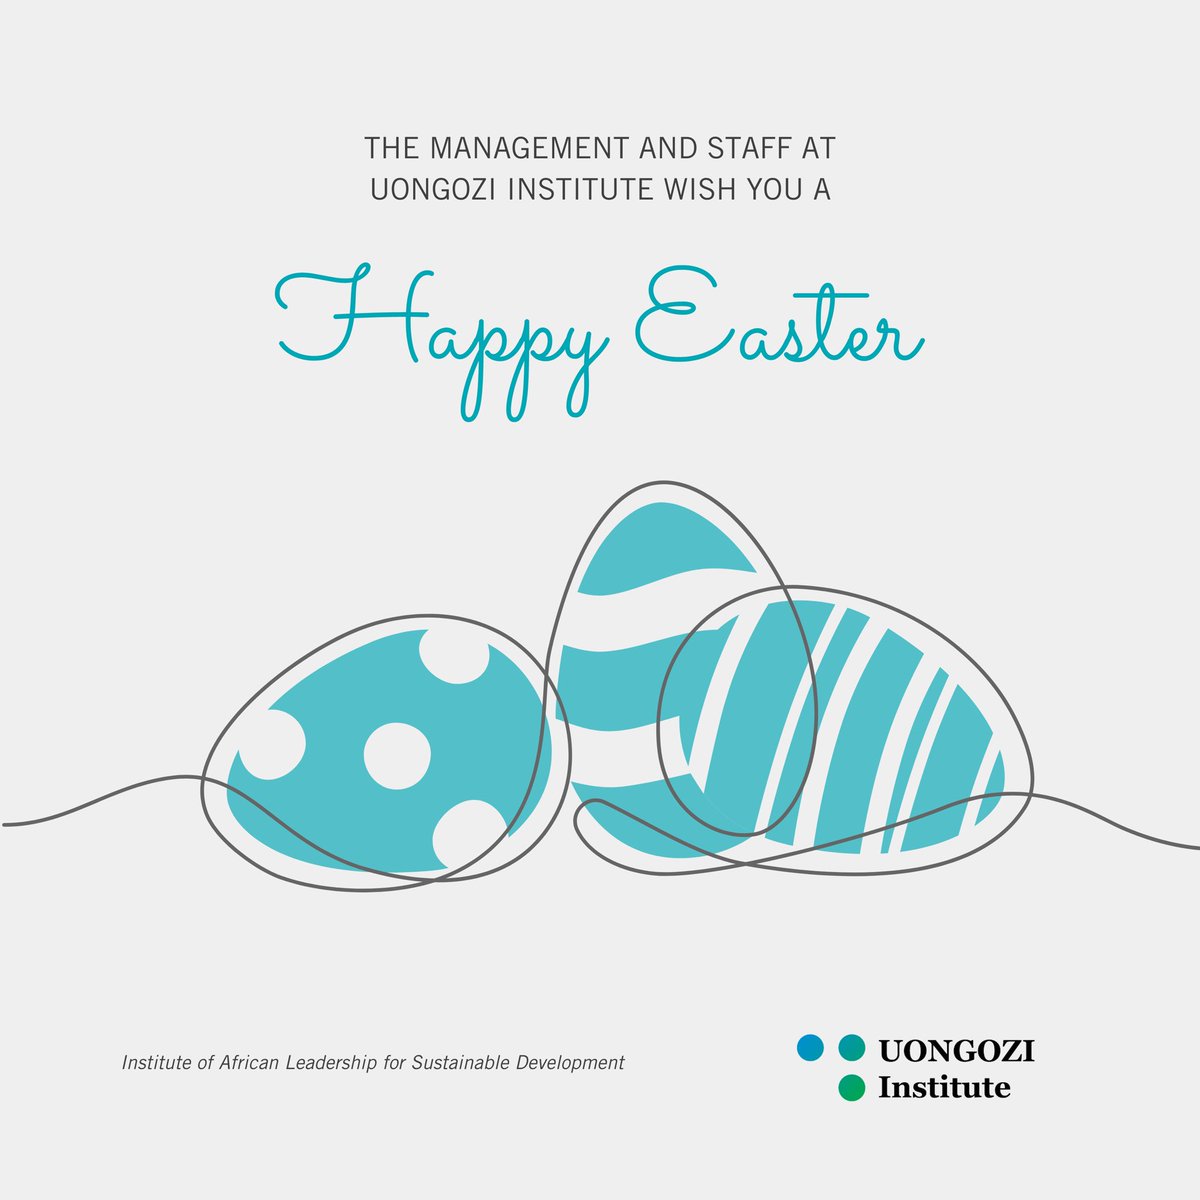 A joyful Easter to you all! Please note that our offices are closed until Monday 1 April 2024, in observance of the holiday. Our Resource Centre will be open tomorrow between 10am - 1:00pm, and 2:00pm - 4:00pm.